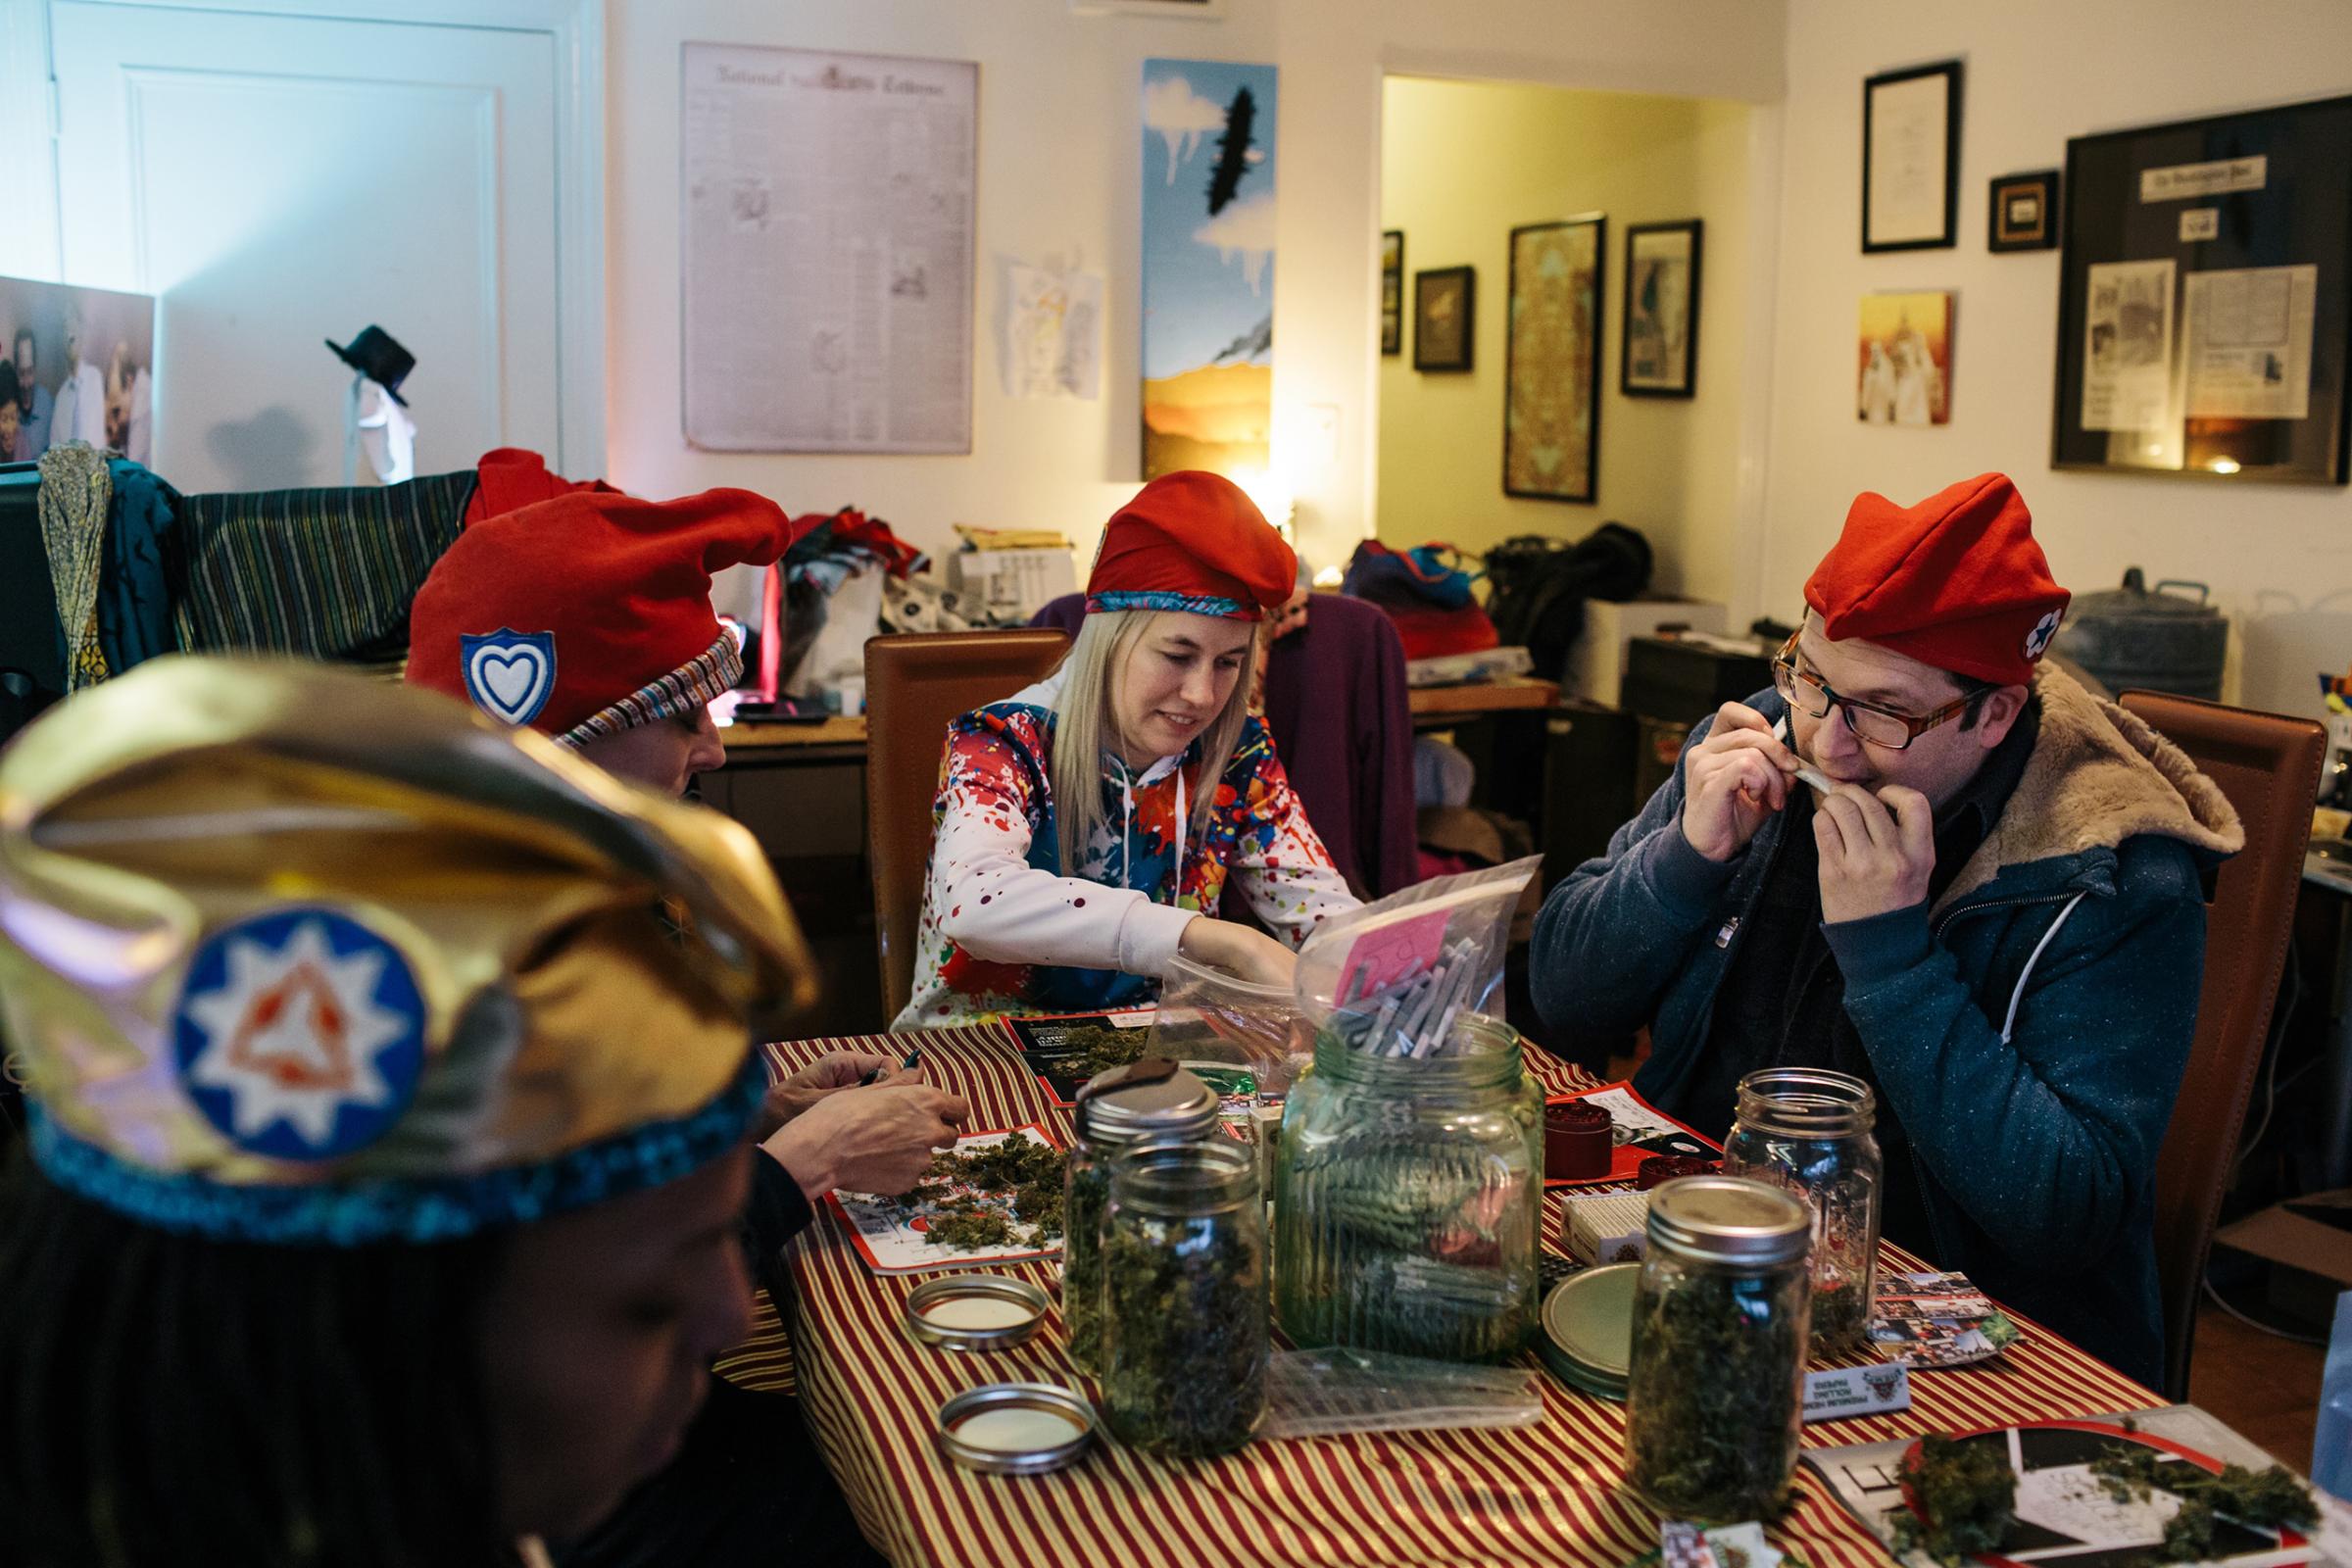 Adam Eidinger, of the cannabis community DCMJ, rolls a joint in a Washington, D.C., home on Jan. 16. The group will distribute thousands of joints before President-Elect Donald Trump's inauguration.